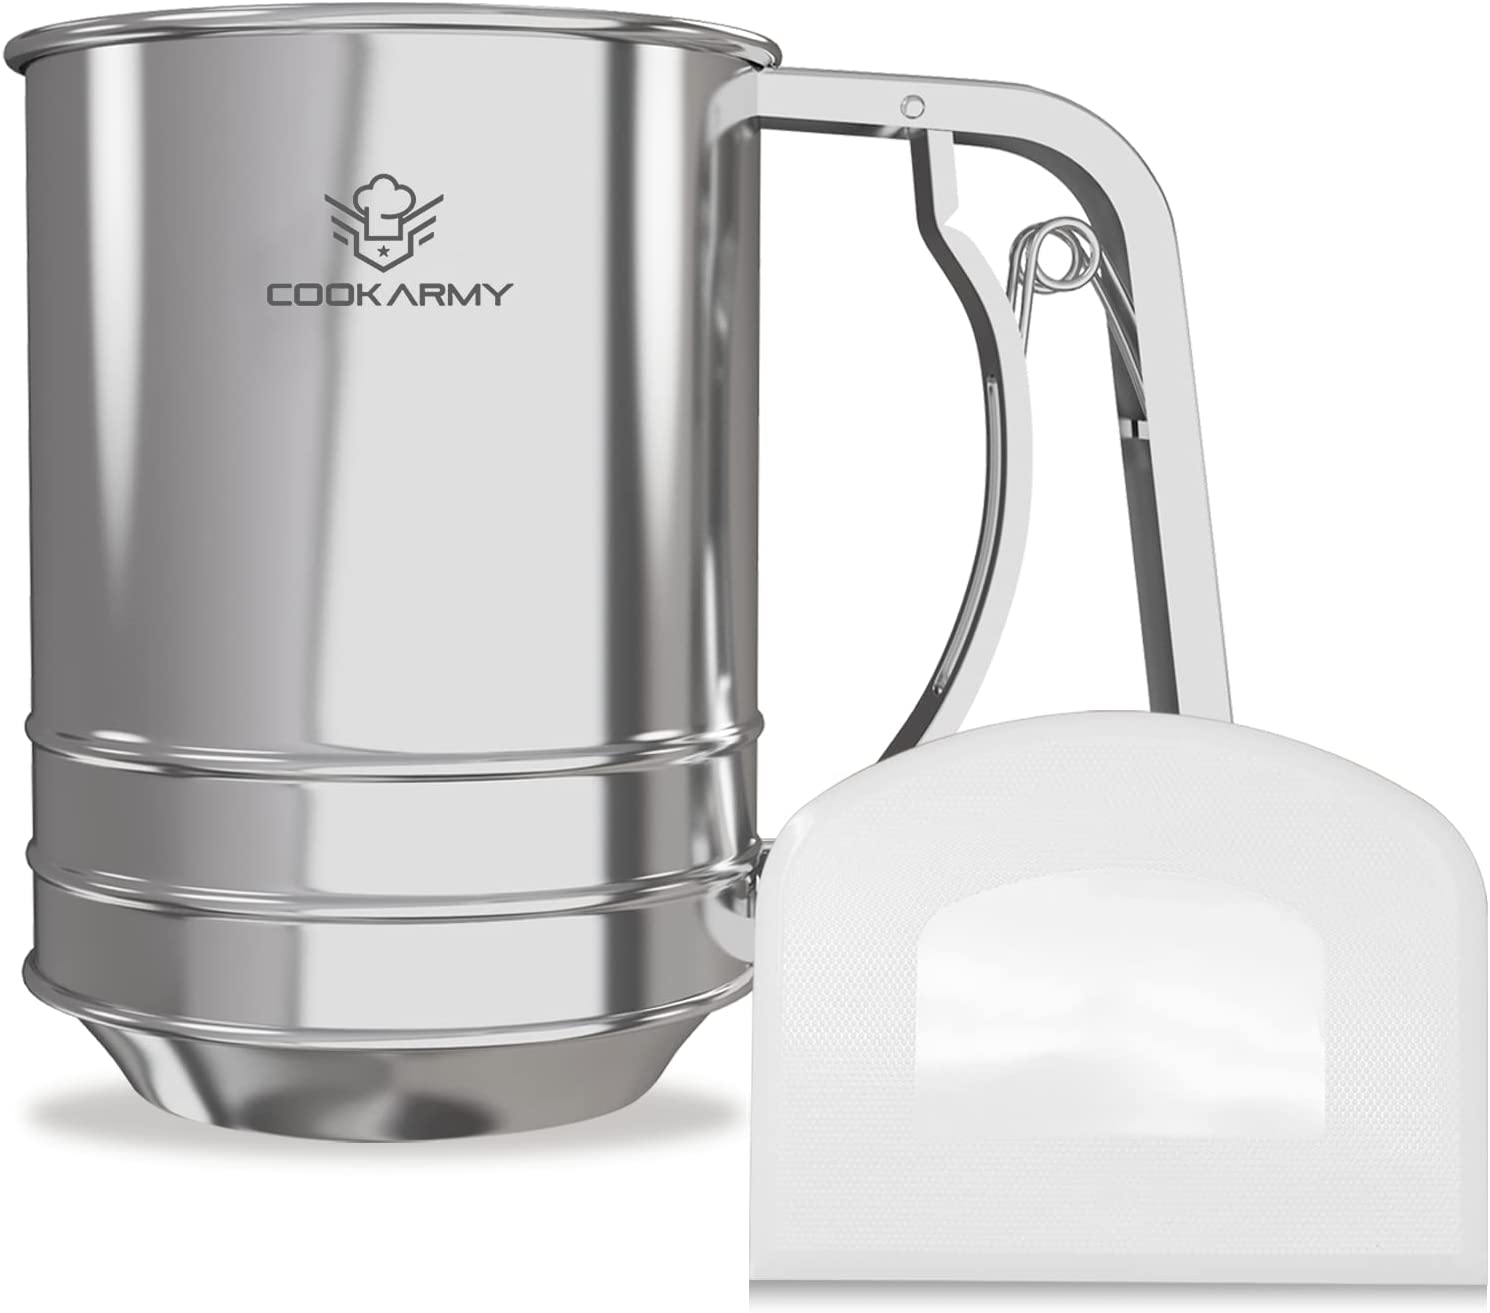 https://www.dontwasteyourmoney.com/wp-content/uploads/2023/04/cook-army-squeeze-handle-stainless-steel-flour-sifter-flour-sifter.jpg